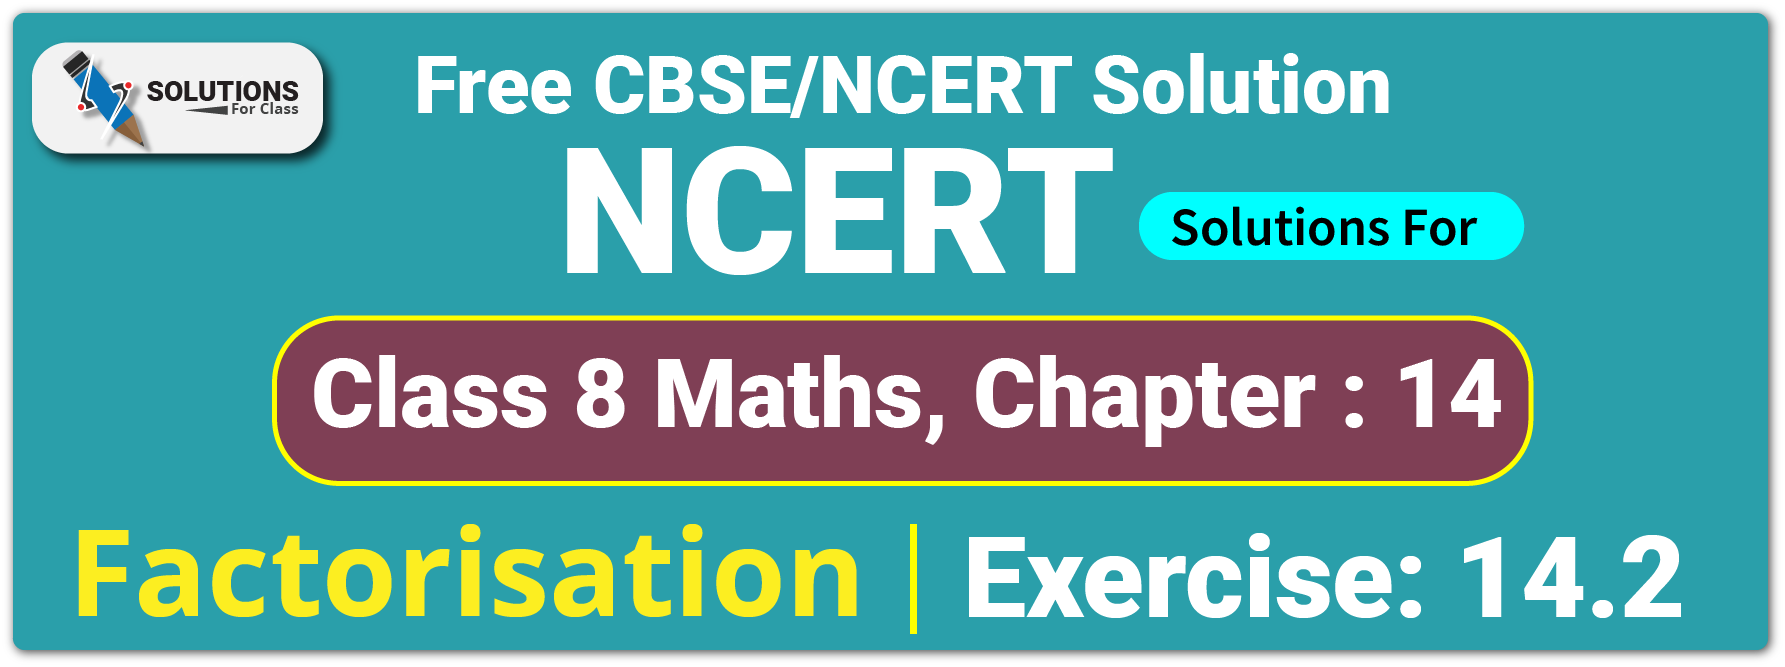 NCERT Solutions For Class 8 Chapter 14, Factorisation, Exercise14.2